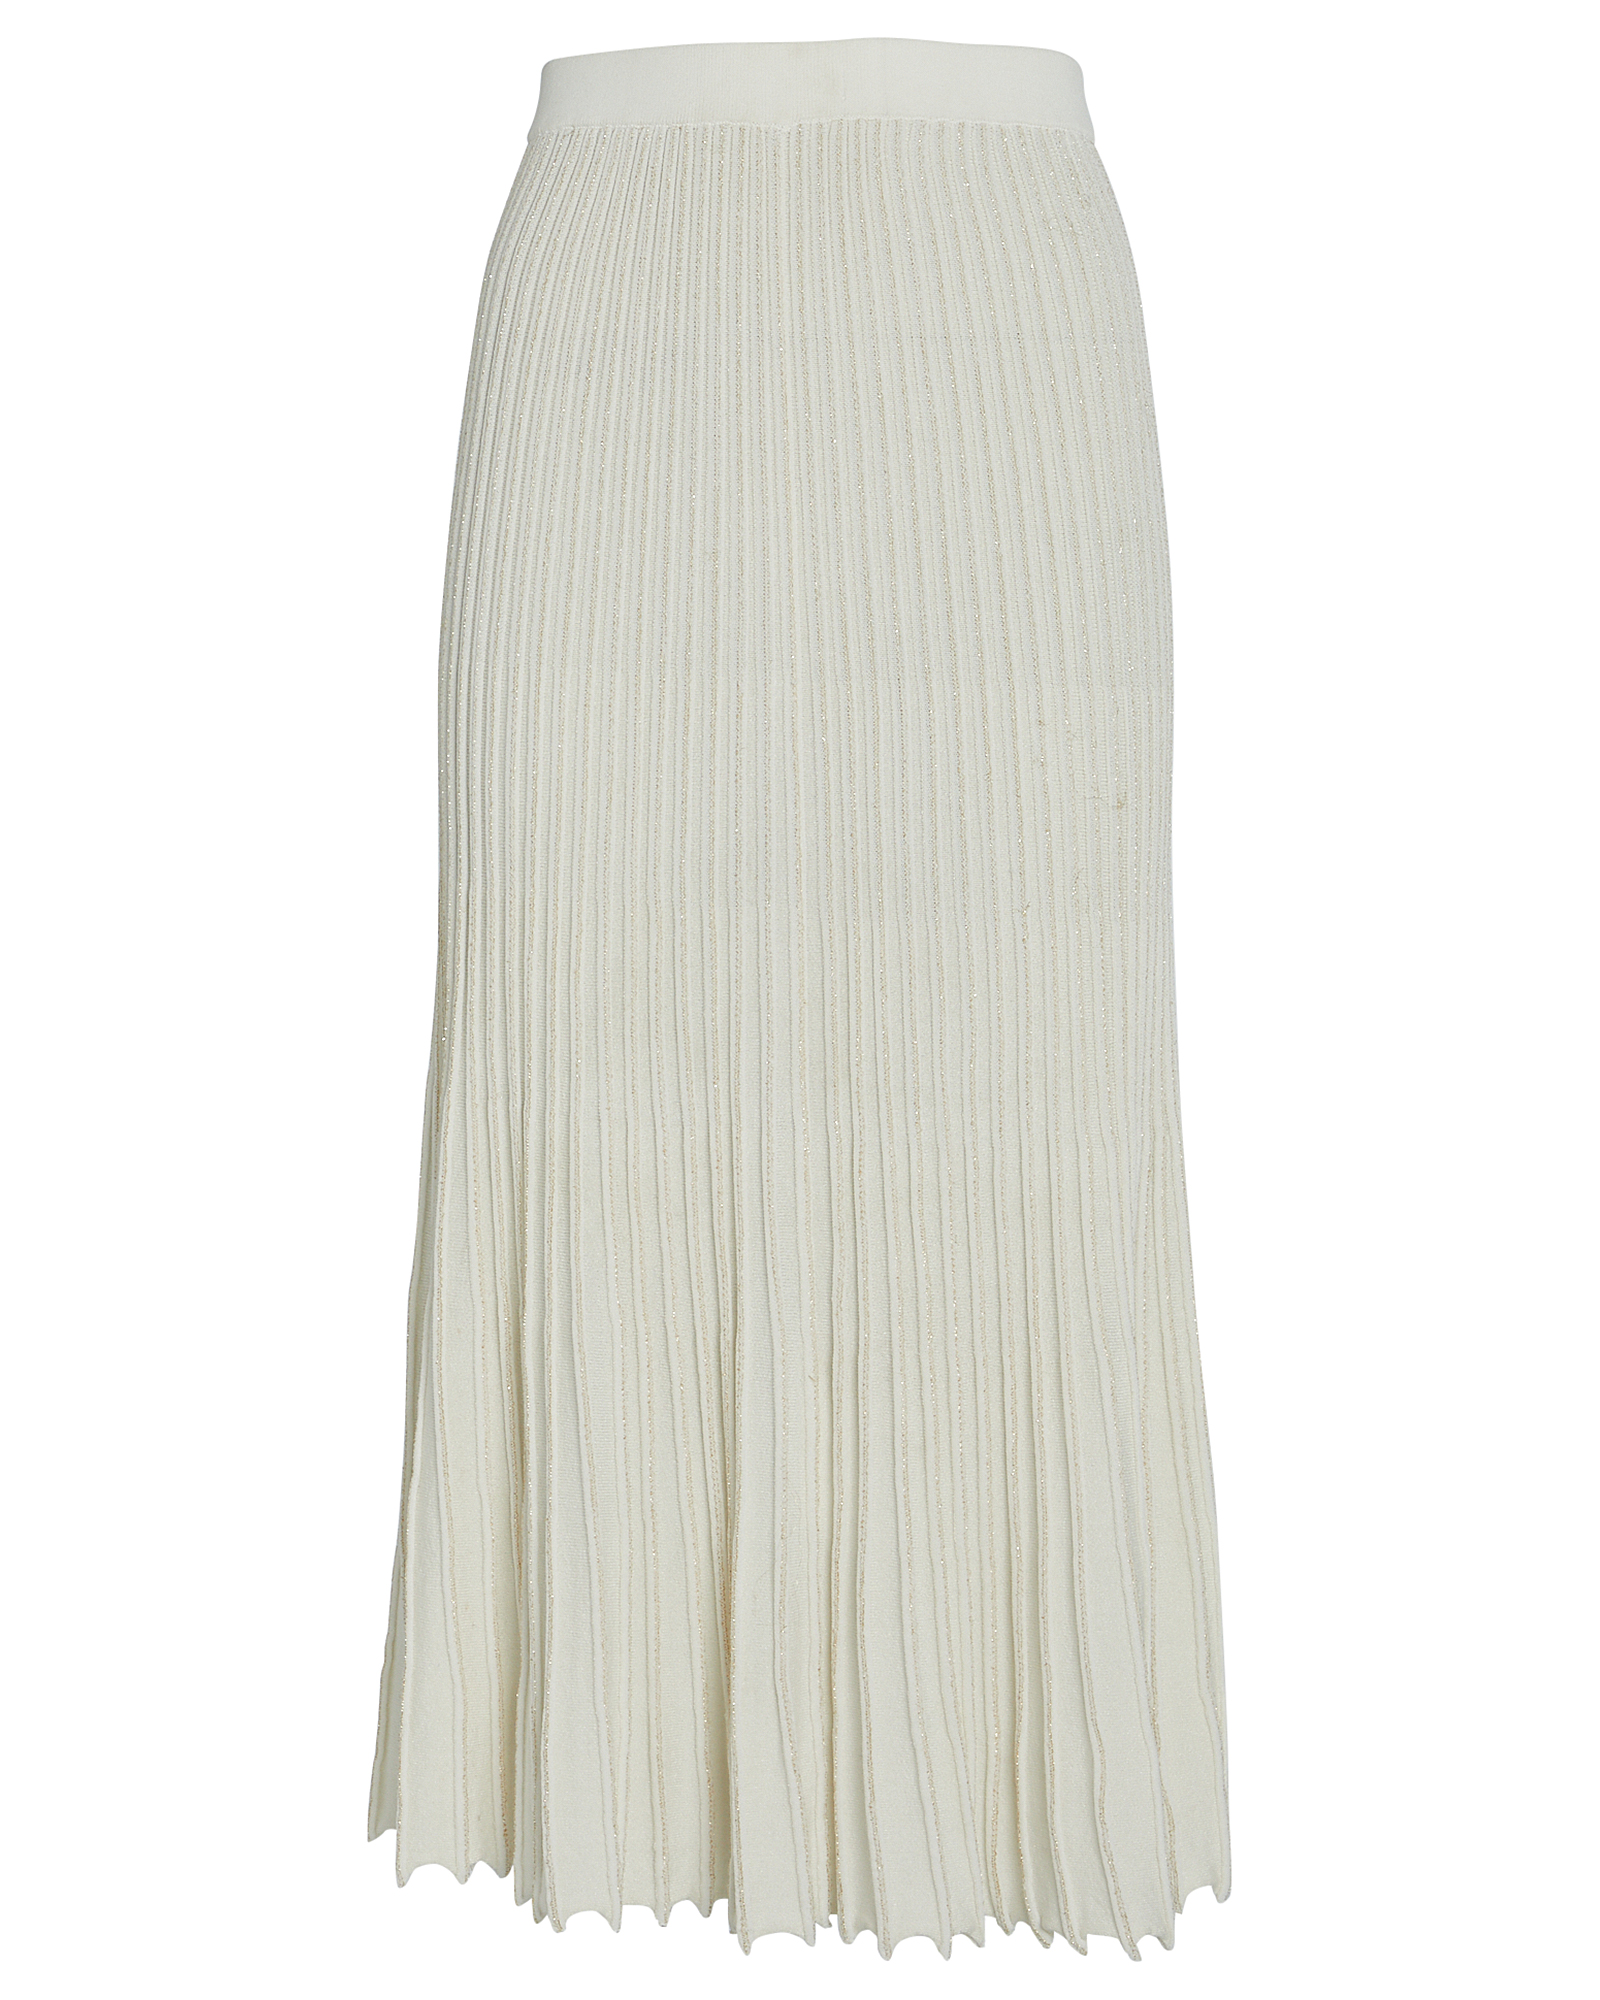 INTERMIX Private Label | Kelly Pleated Knit Skirt | INTERMIX®